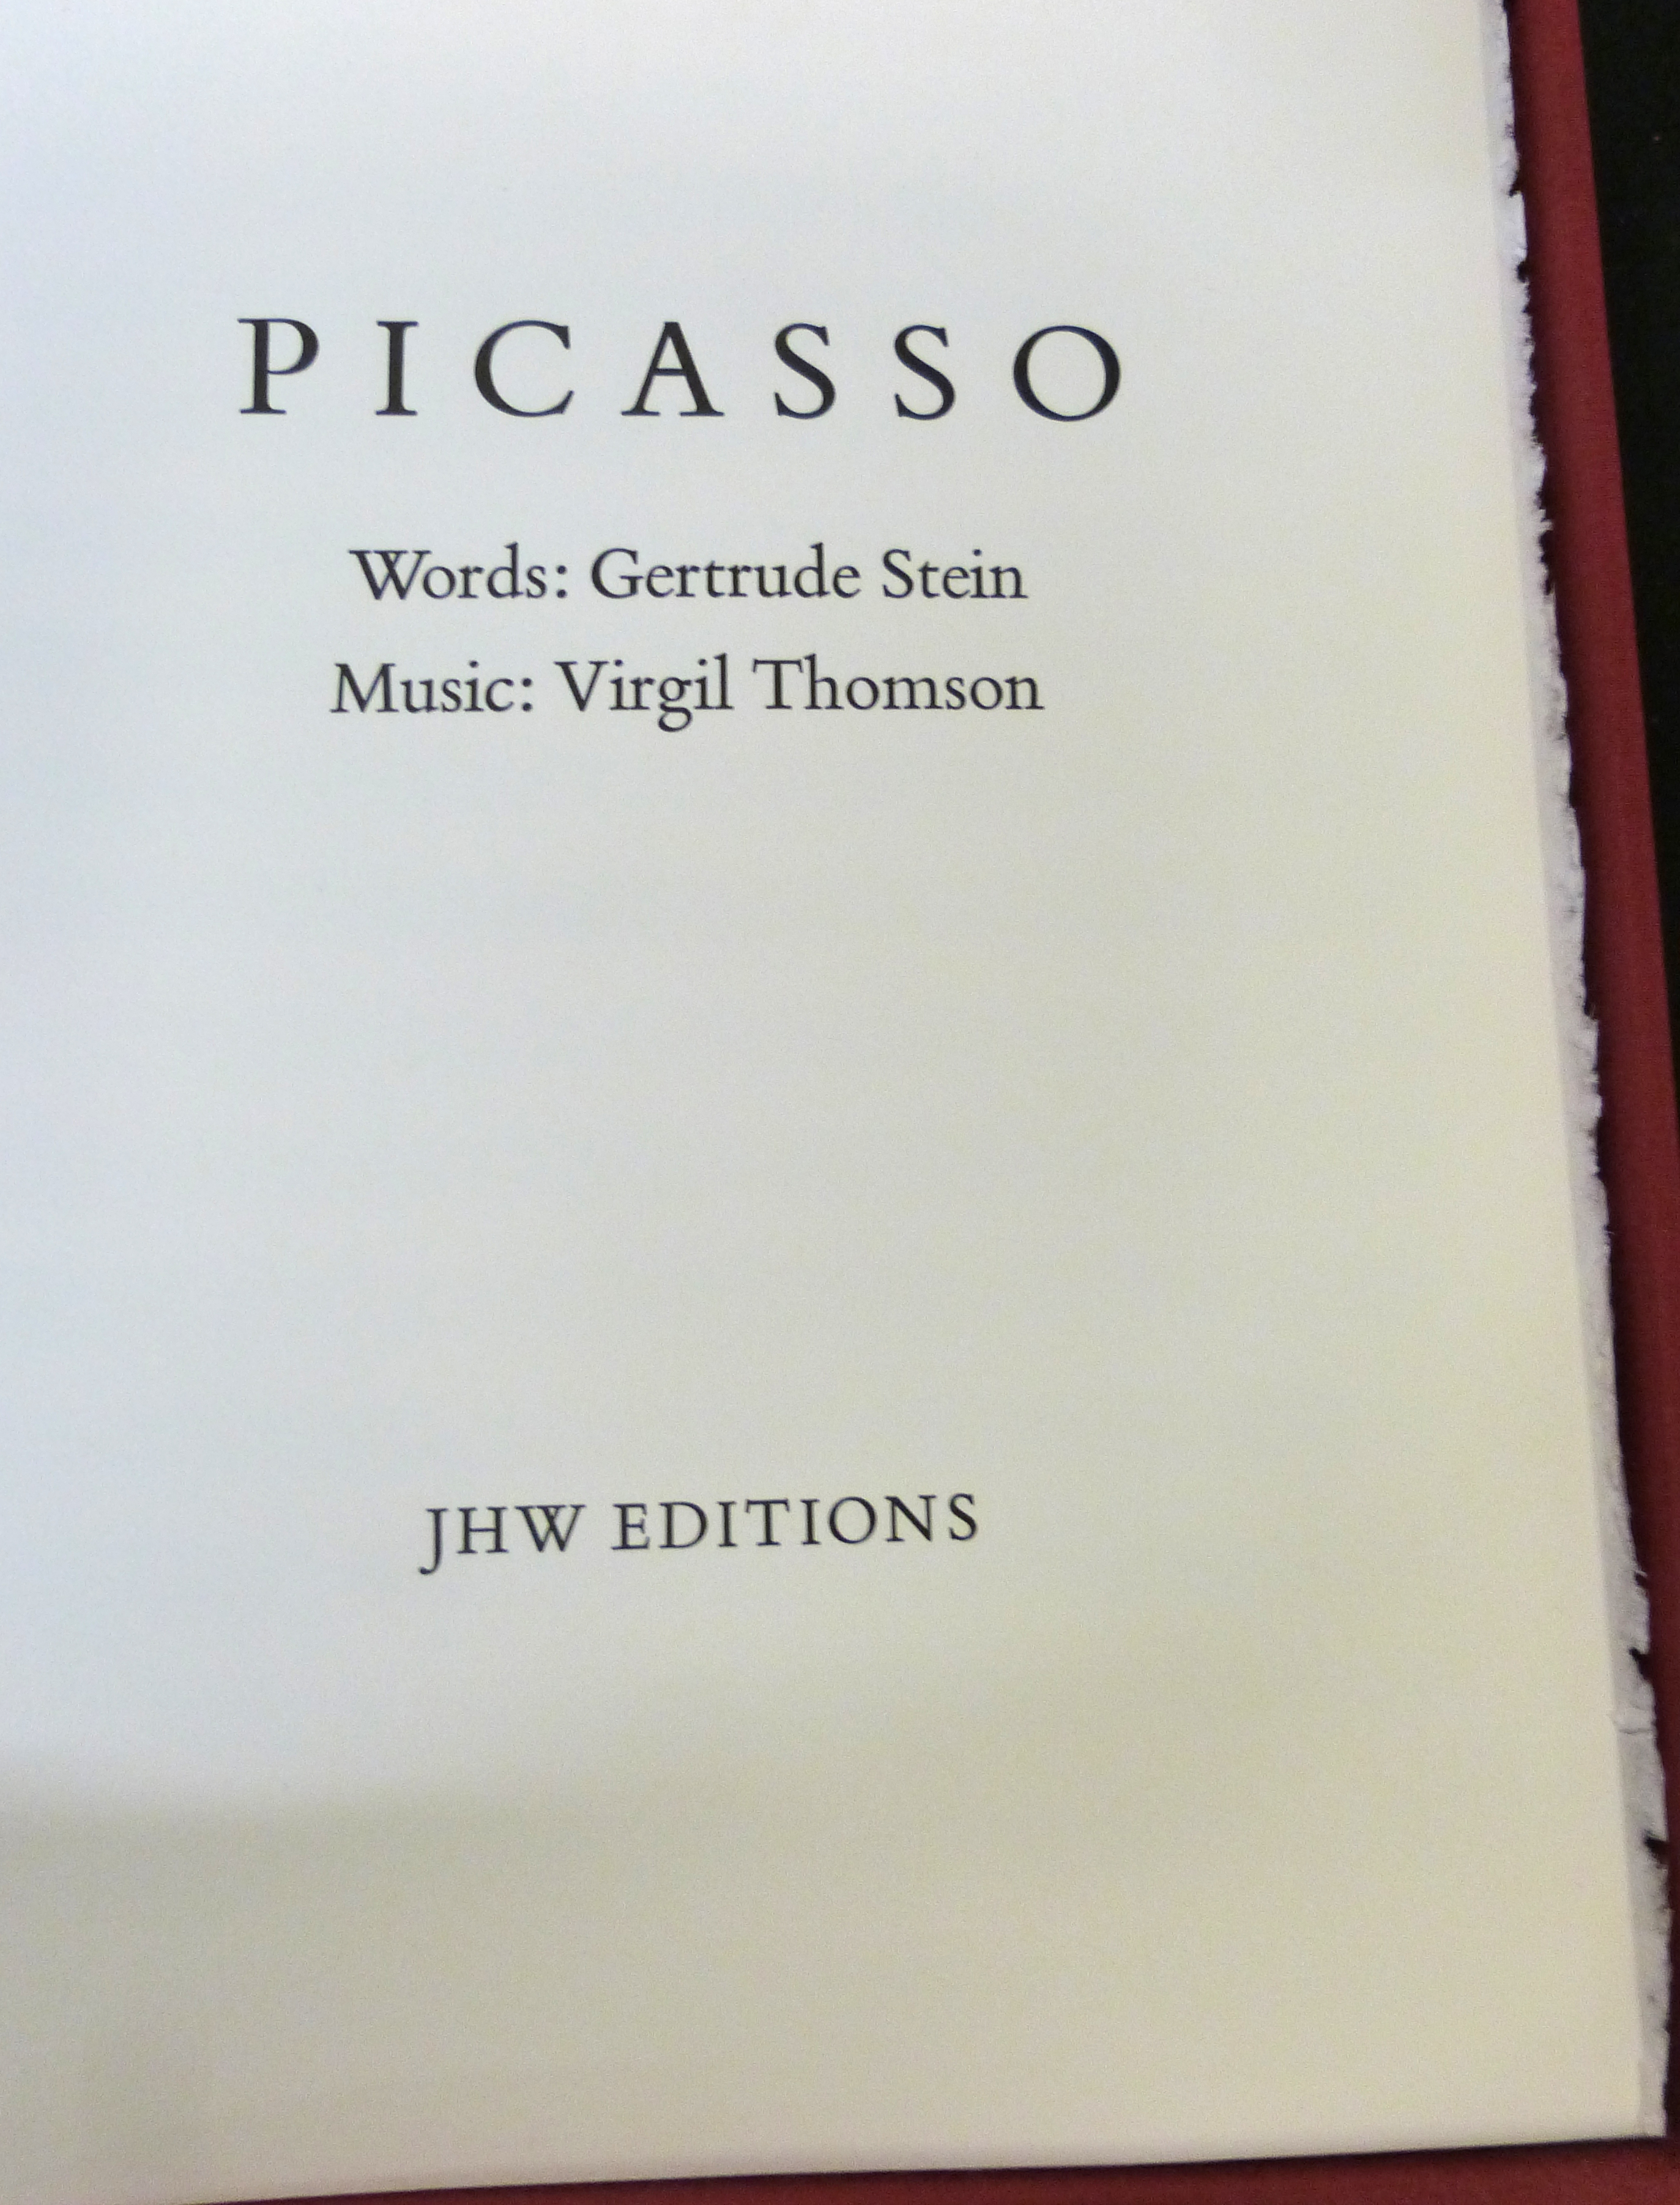 GERTRUDE STEIN & VIRGIL THOMSON: PICASSO, New York, J H W Editions, 1997 (300) (25), Hors Commerce - Image 2 of 3